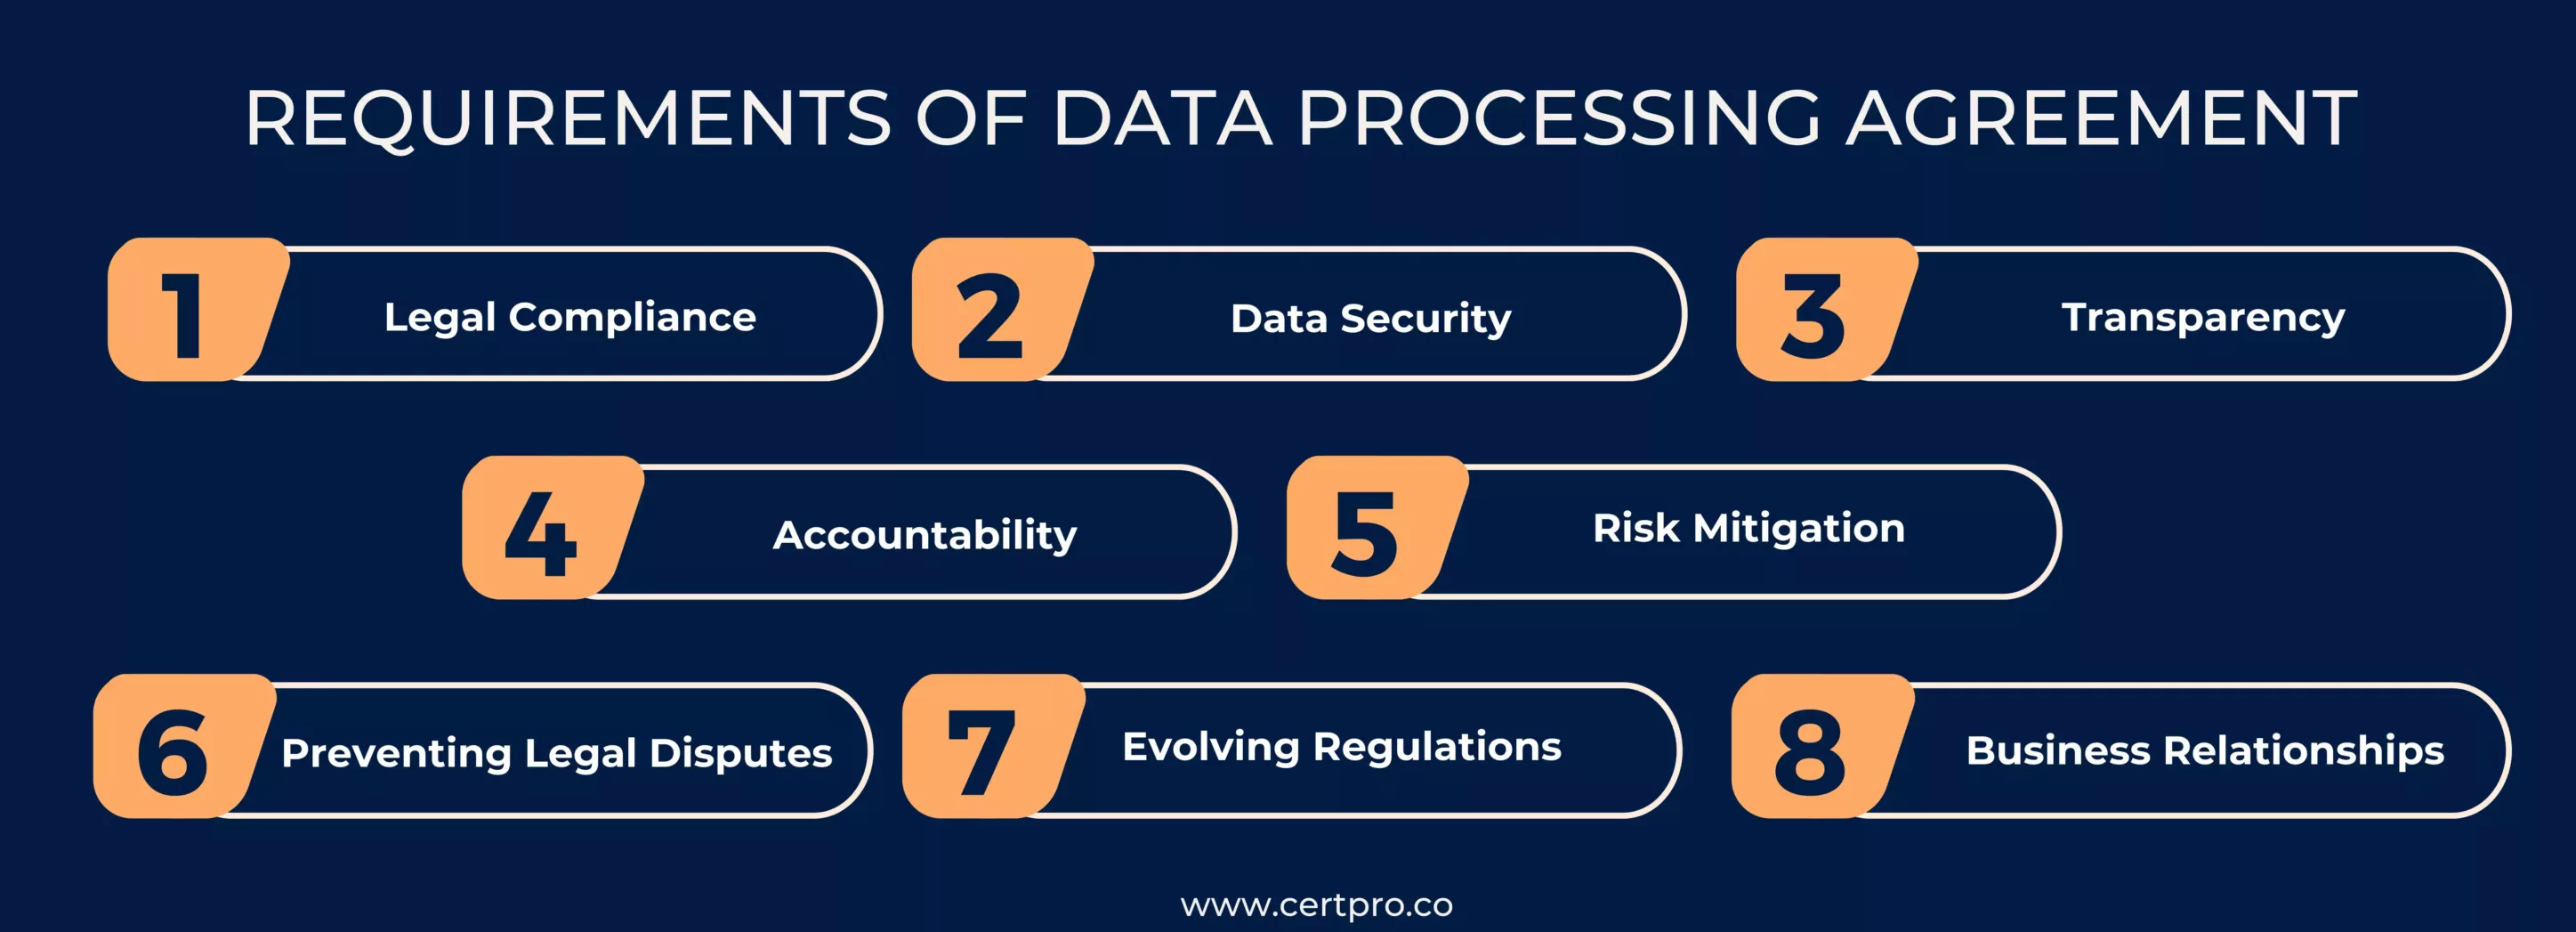 Requirements of Data processing agreement